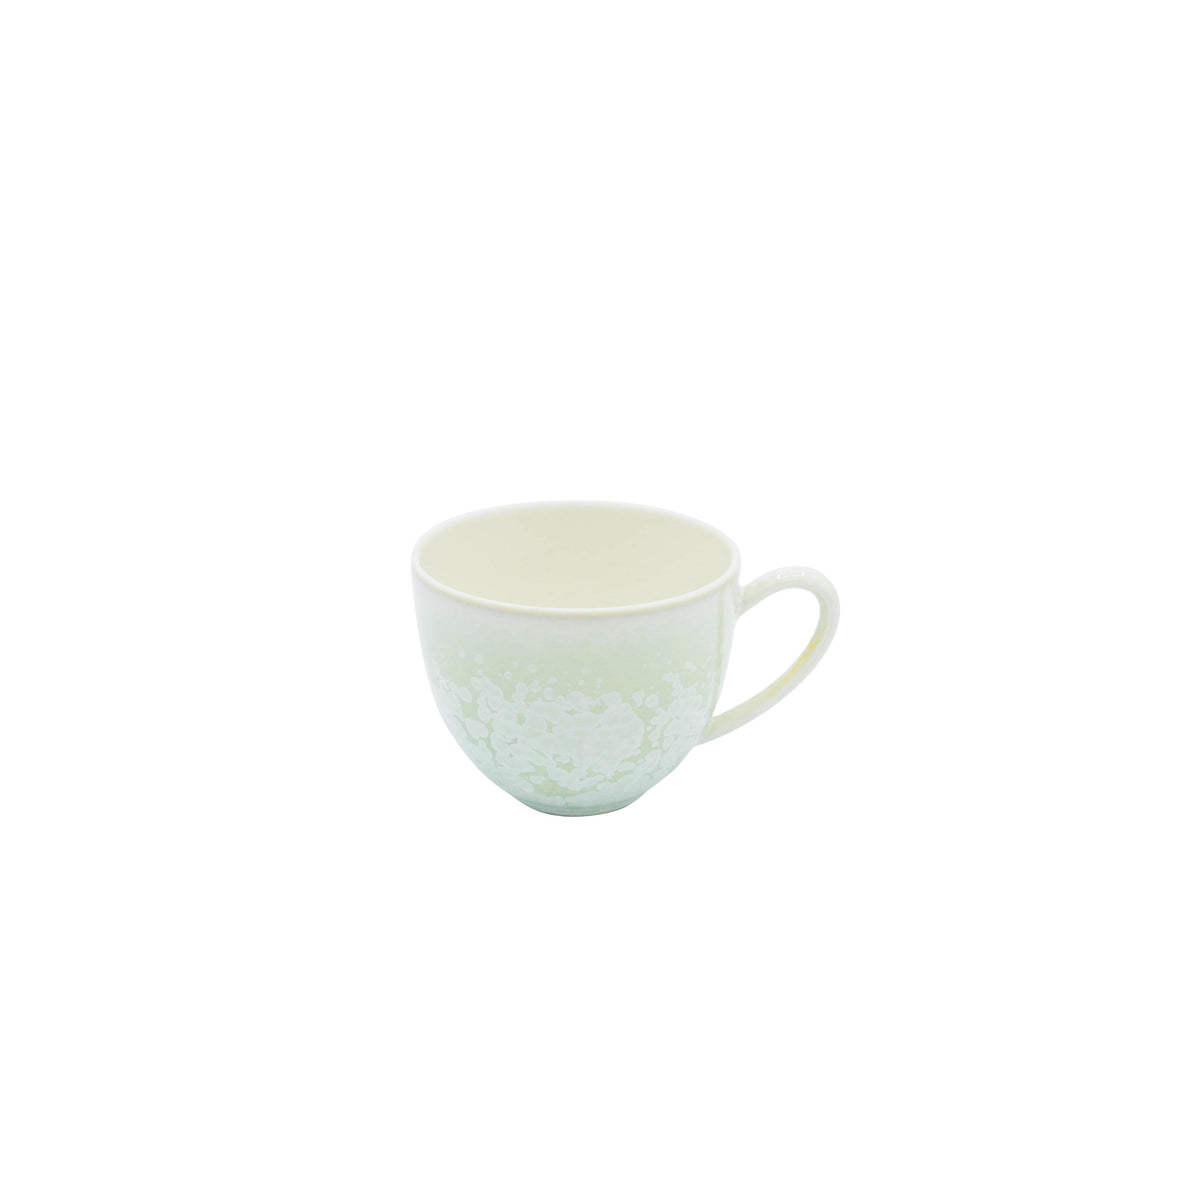 SONG Almond - Coffee set (cup & saucer)